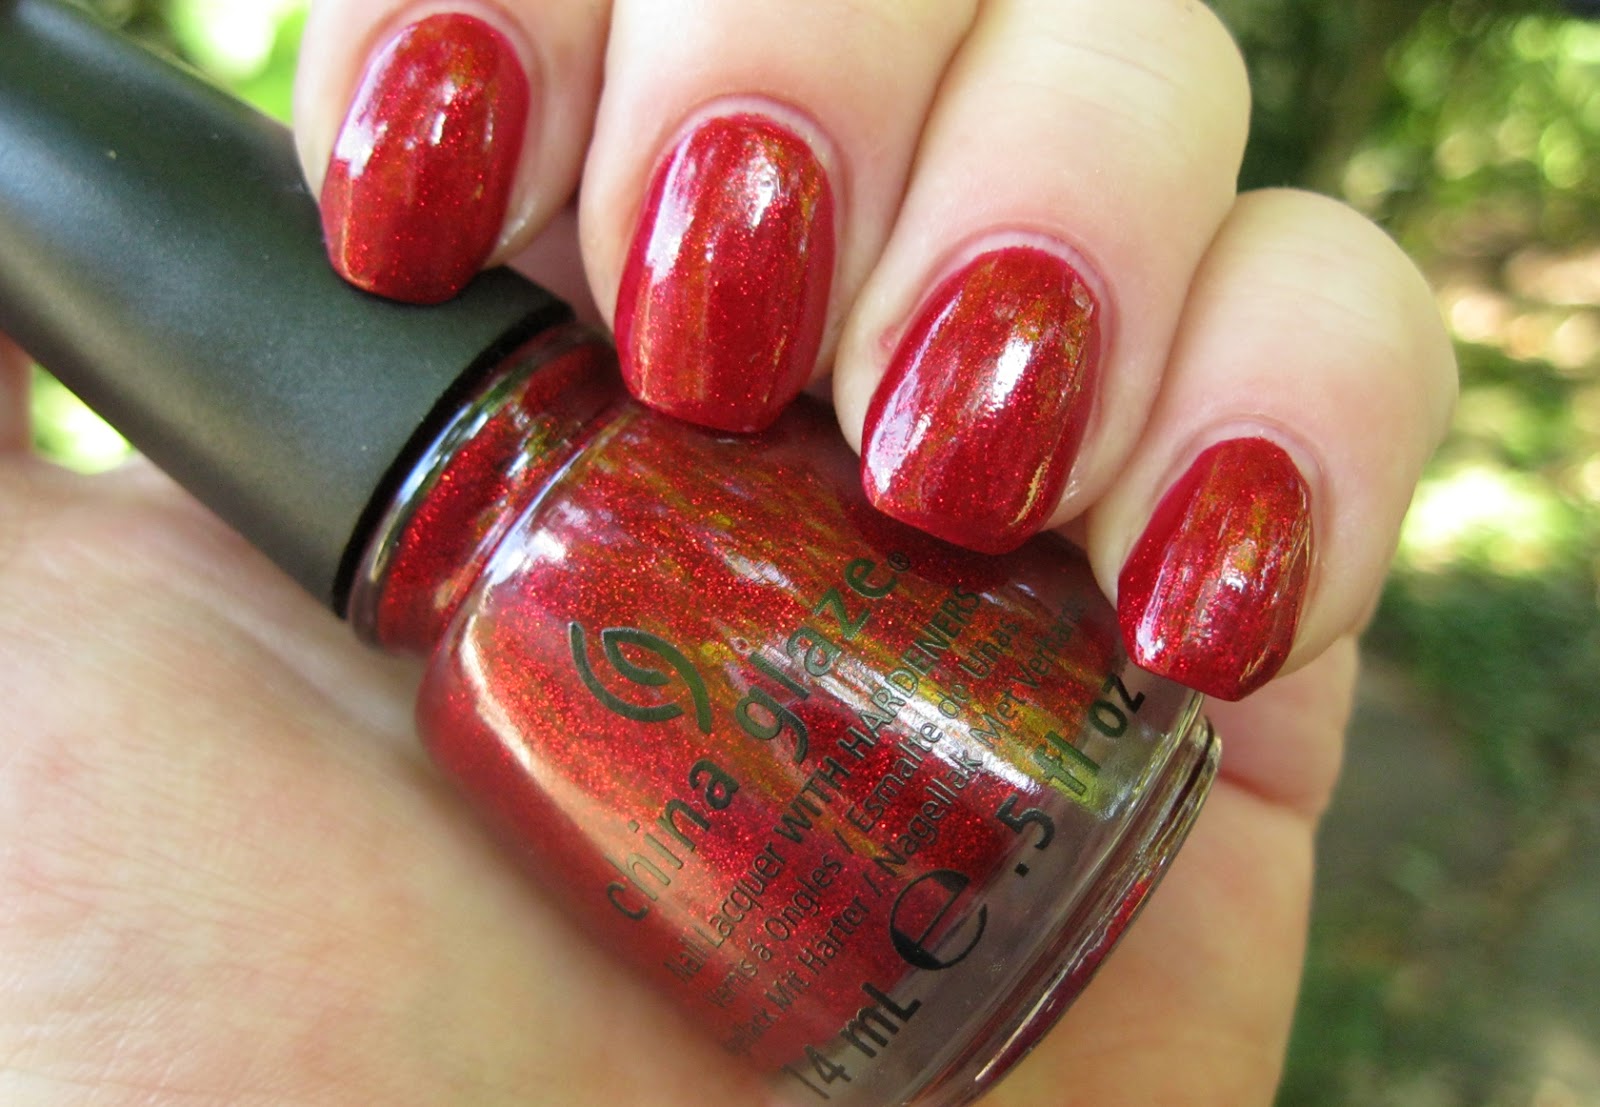 4. China Glaze Nail Lacquer in "Ruby Pumps" - wide 3